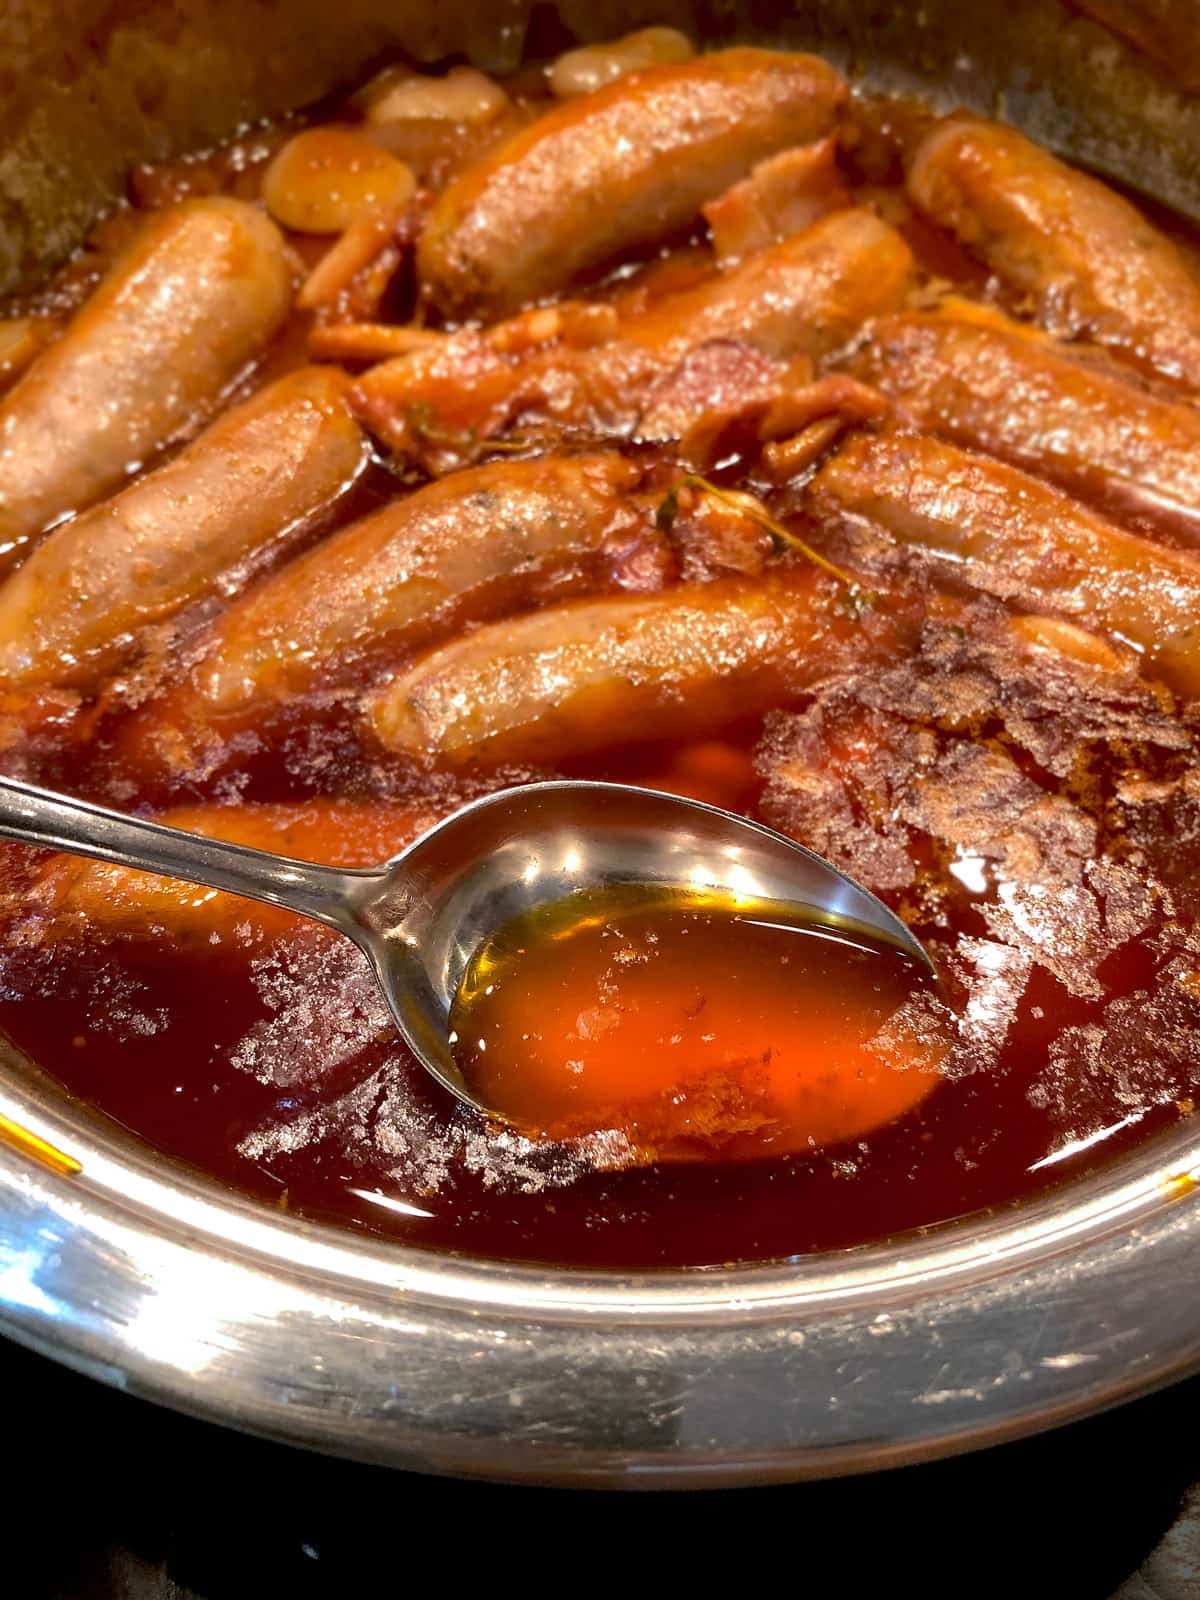 leaked fat from sausages in casserole